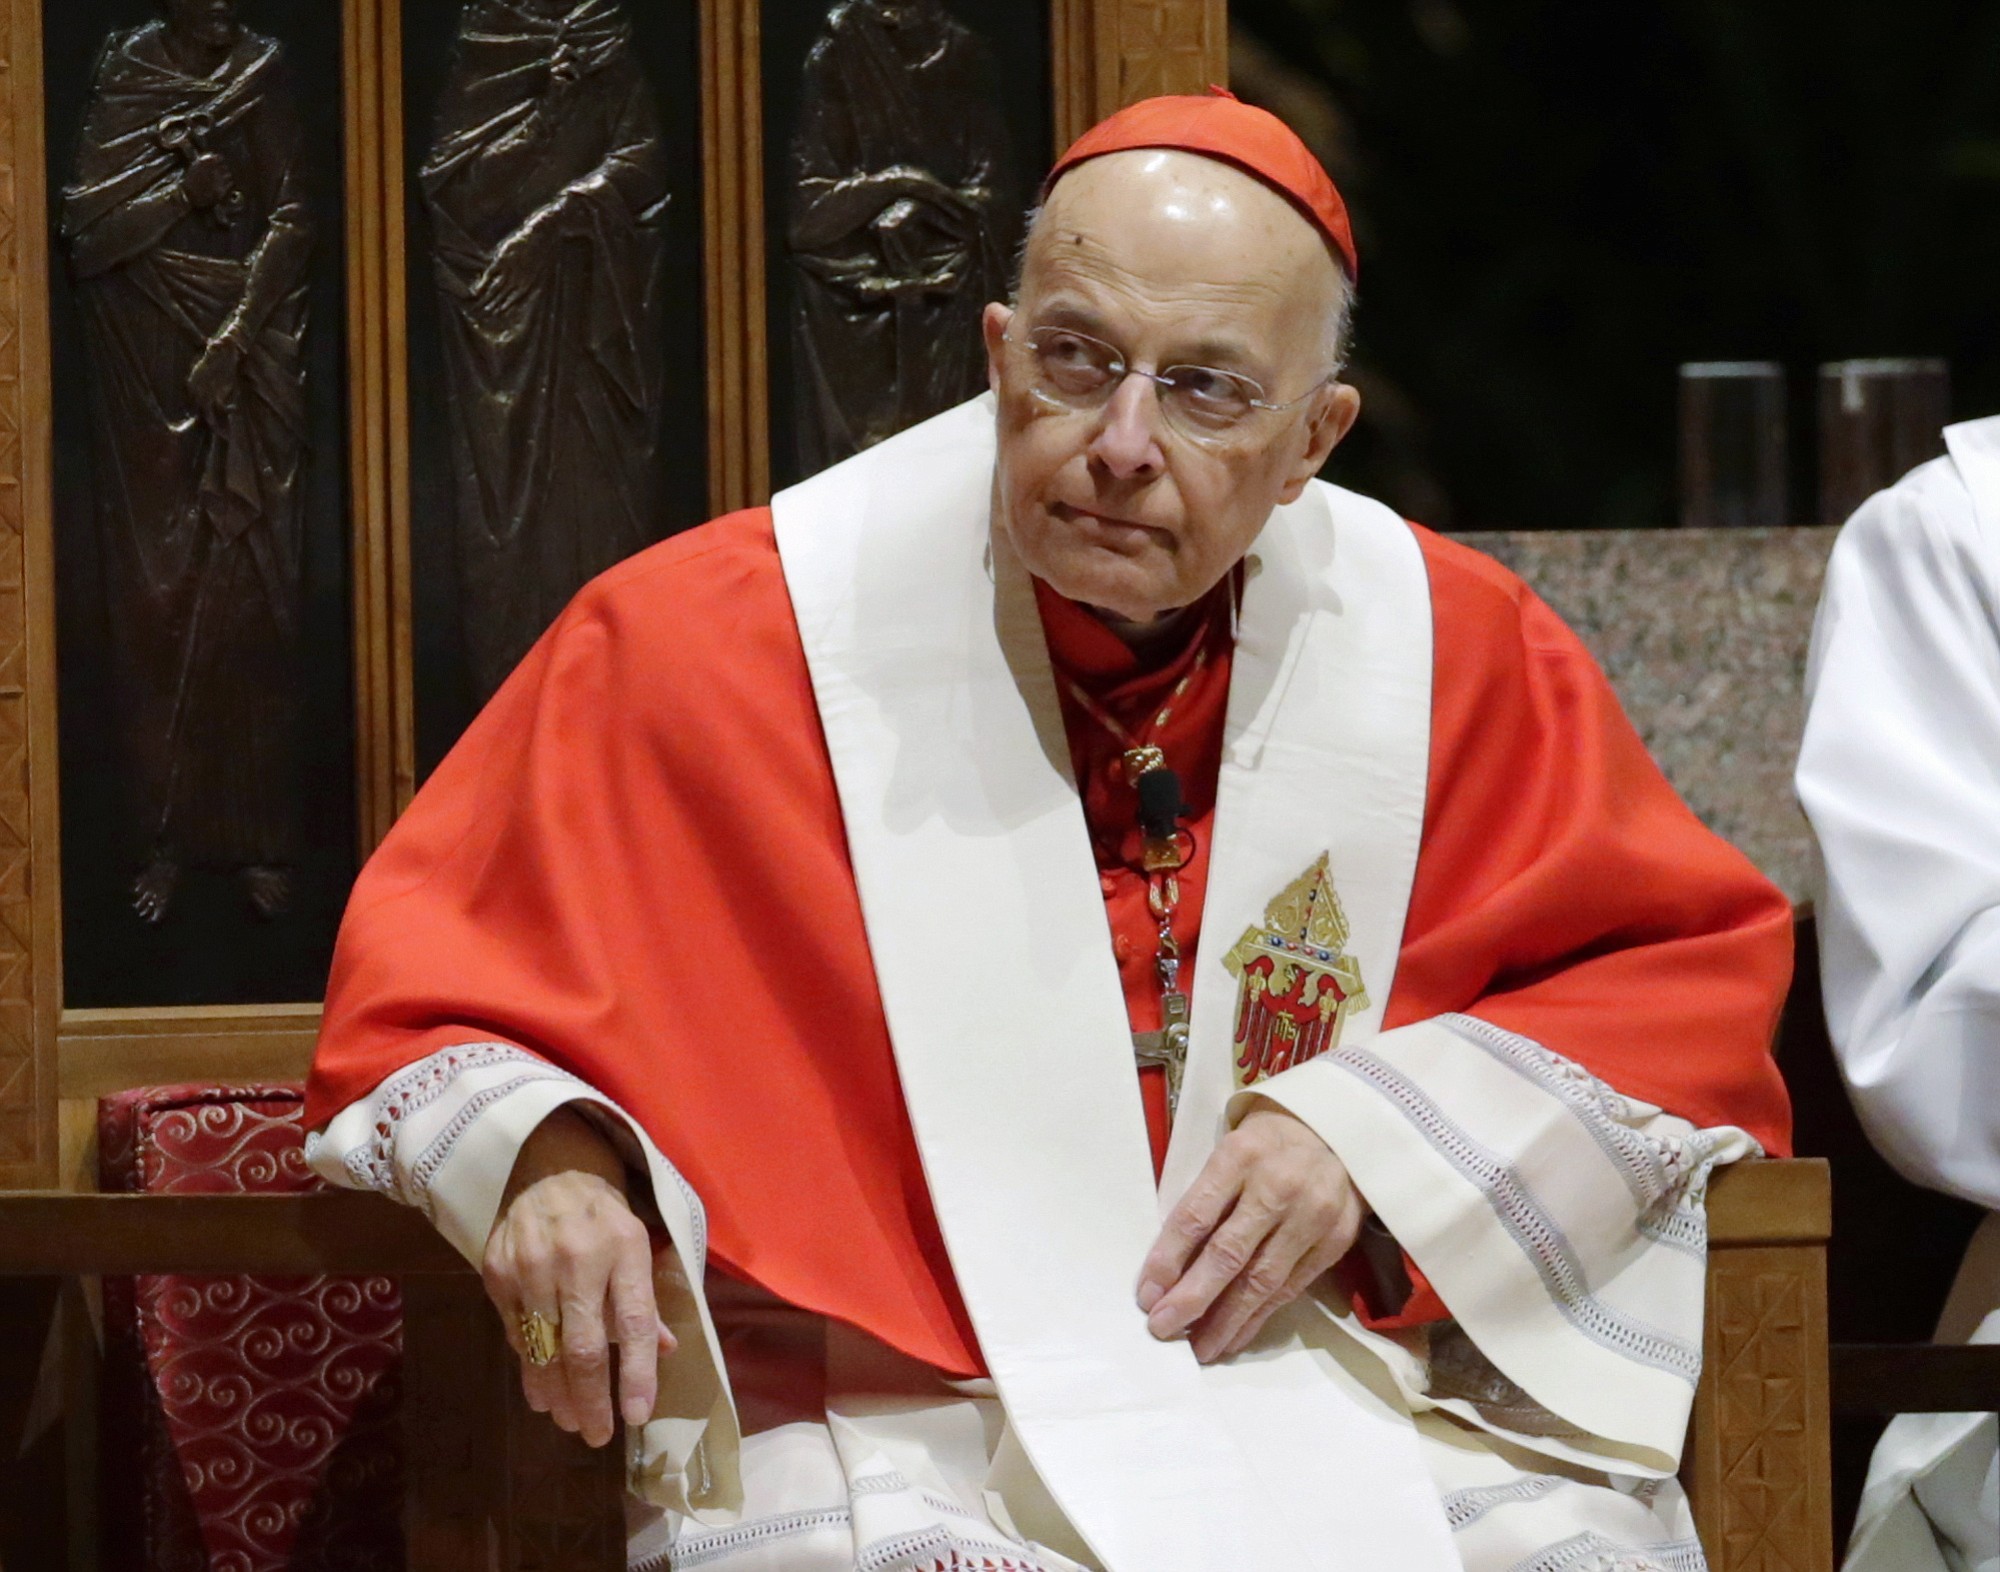 Retiring Cardinal Francis George listens Nov. 17, 2014, at Holy Name Cathedral in Chicago during Bishop Blase Cupich's Rite of Reception service. The Chicago Archdiocese announced Friday that George died after a long bout with cancer. He was 78.